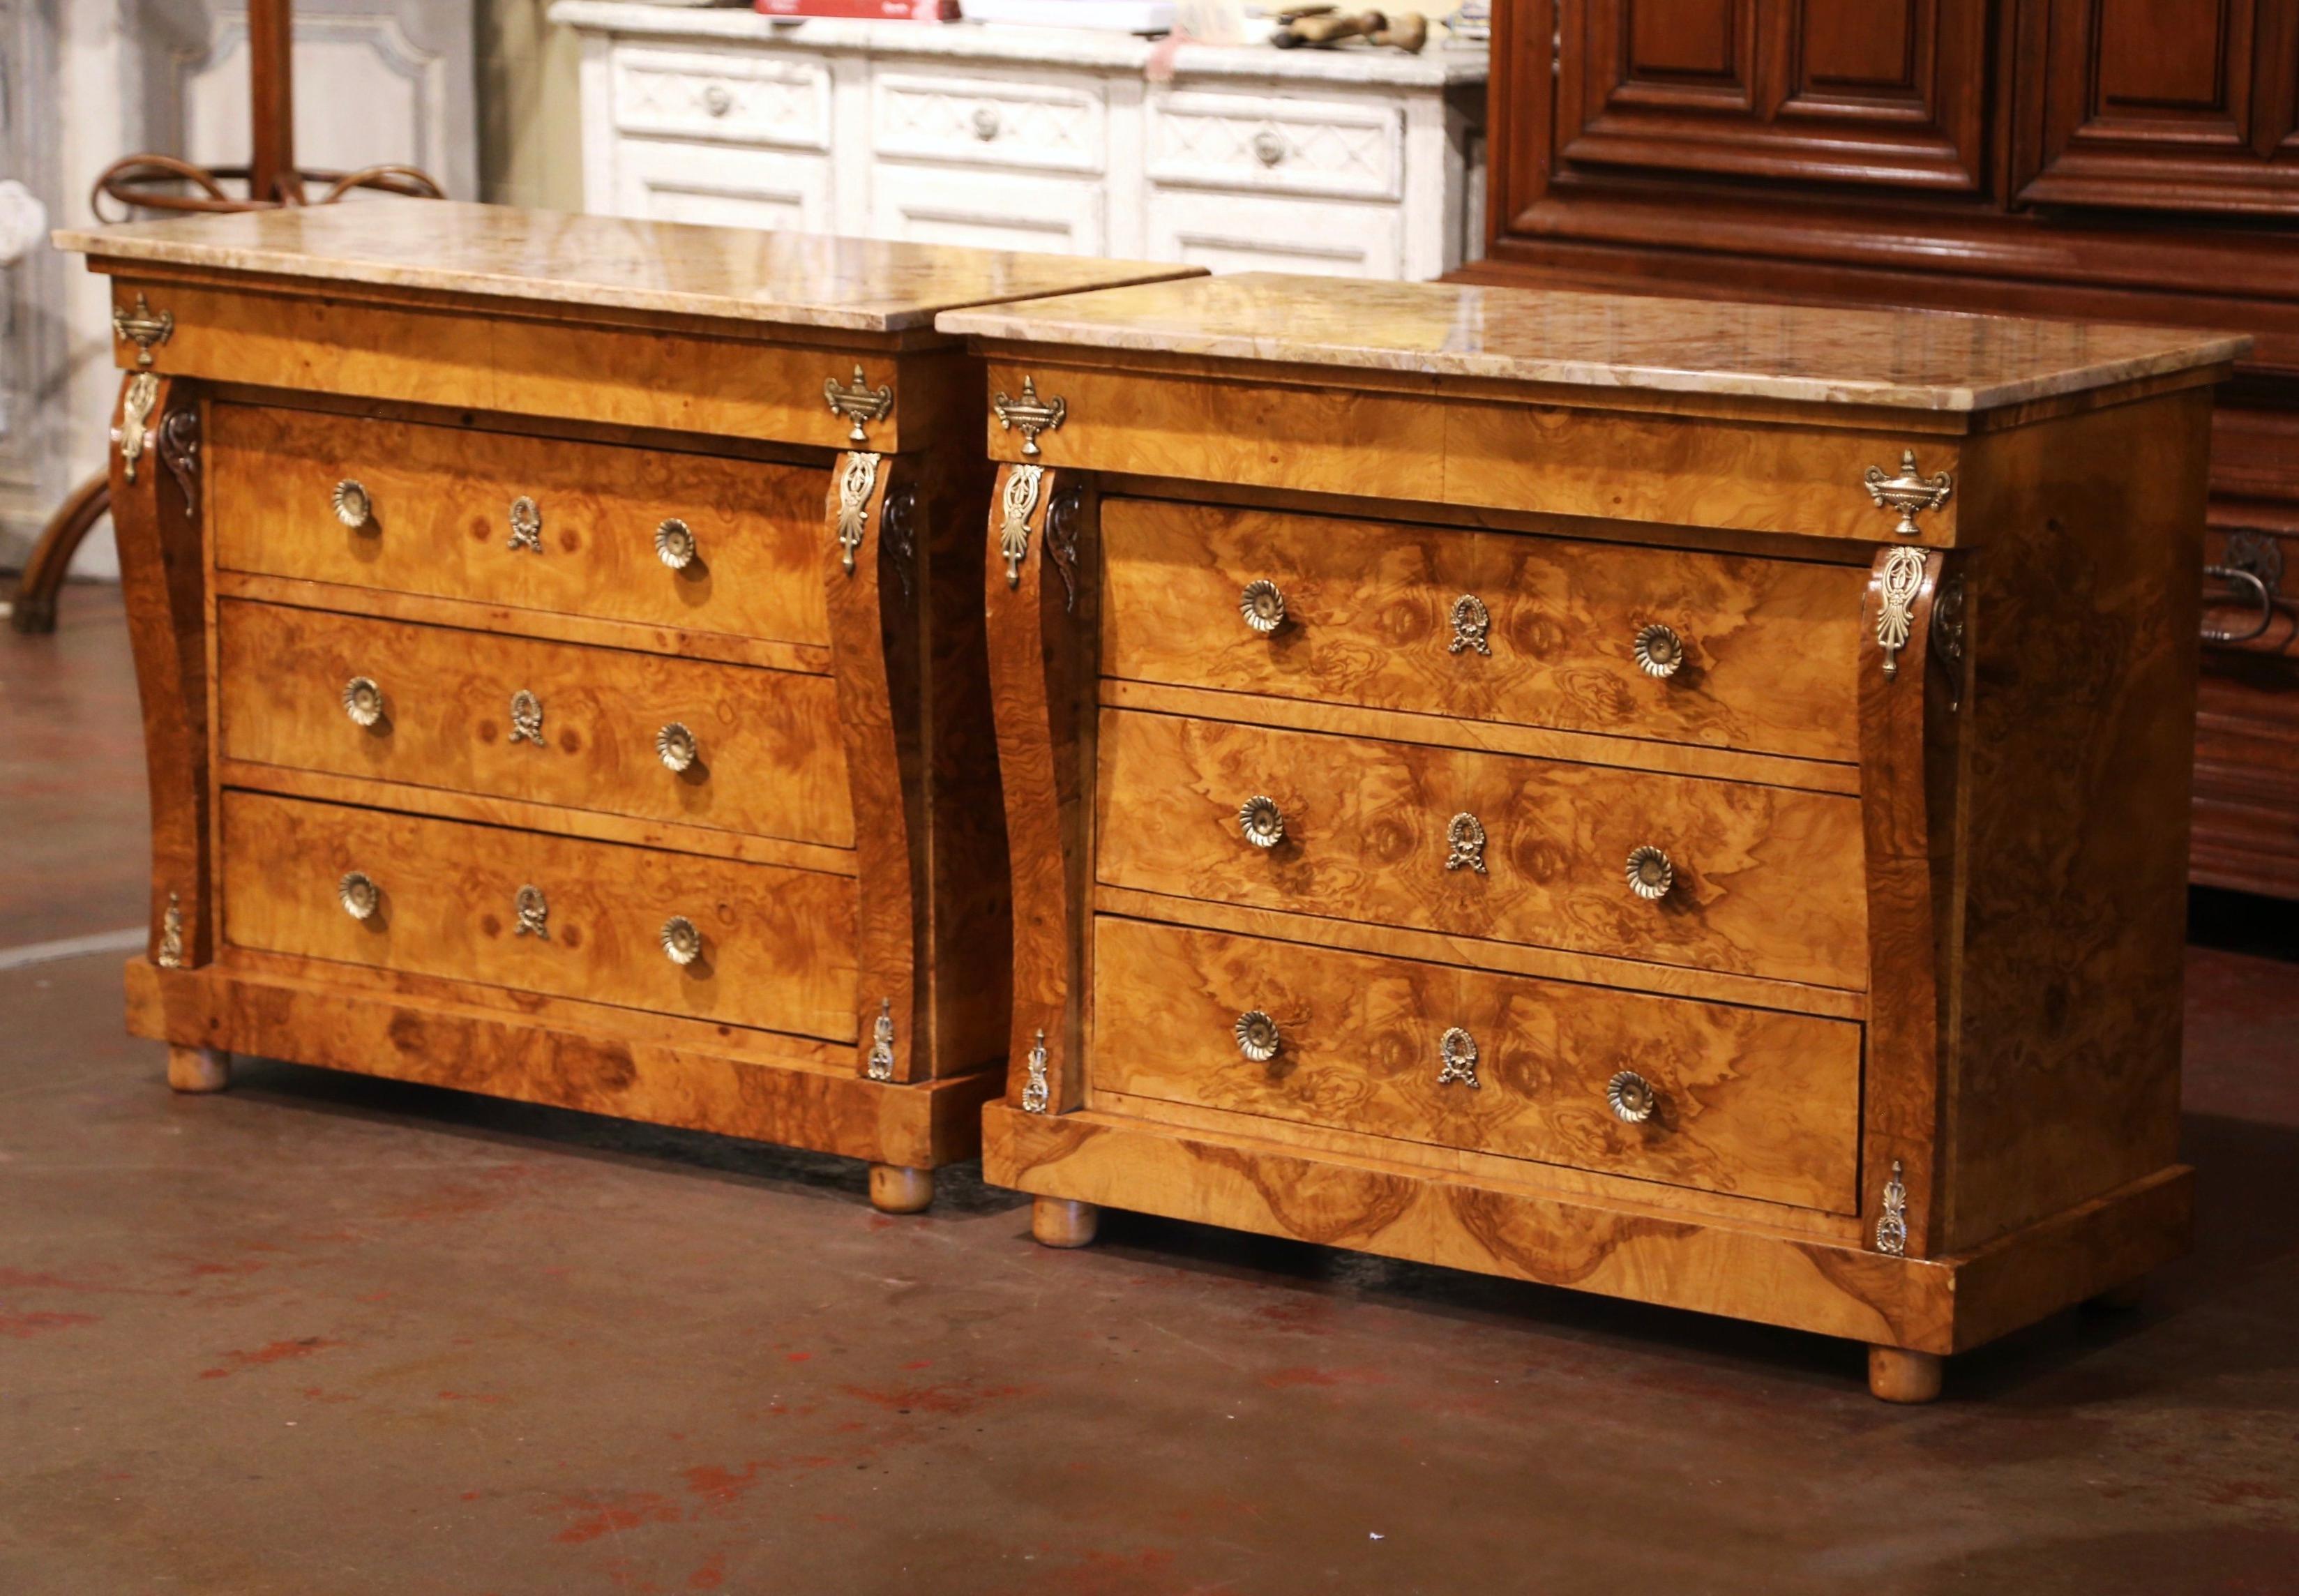 Crafted in France, circa 1960, each chest built of burl elm, sits on bun feet over a straight plinth apron. Decorated with scrolled corner posts dressed with bronze mounts, each cabinet with projecting top frieze features three drawers across the